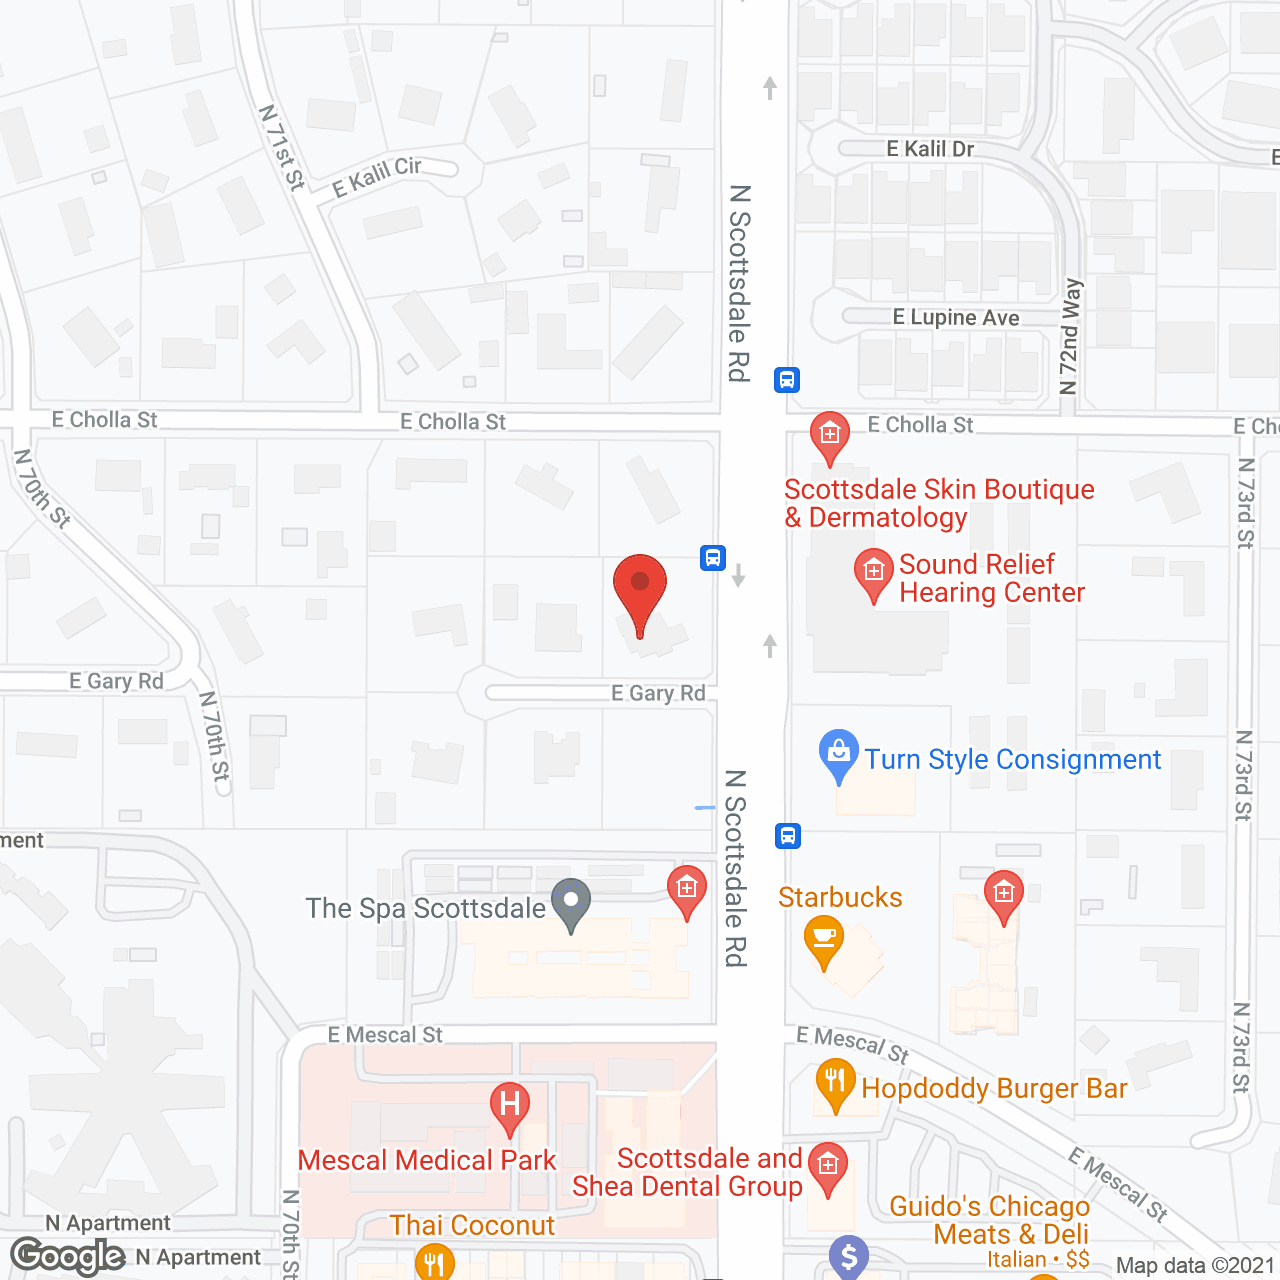 Park Place Residences in google map